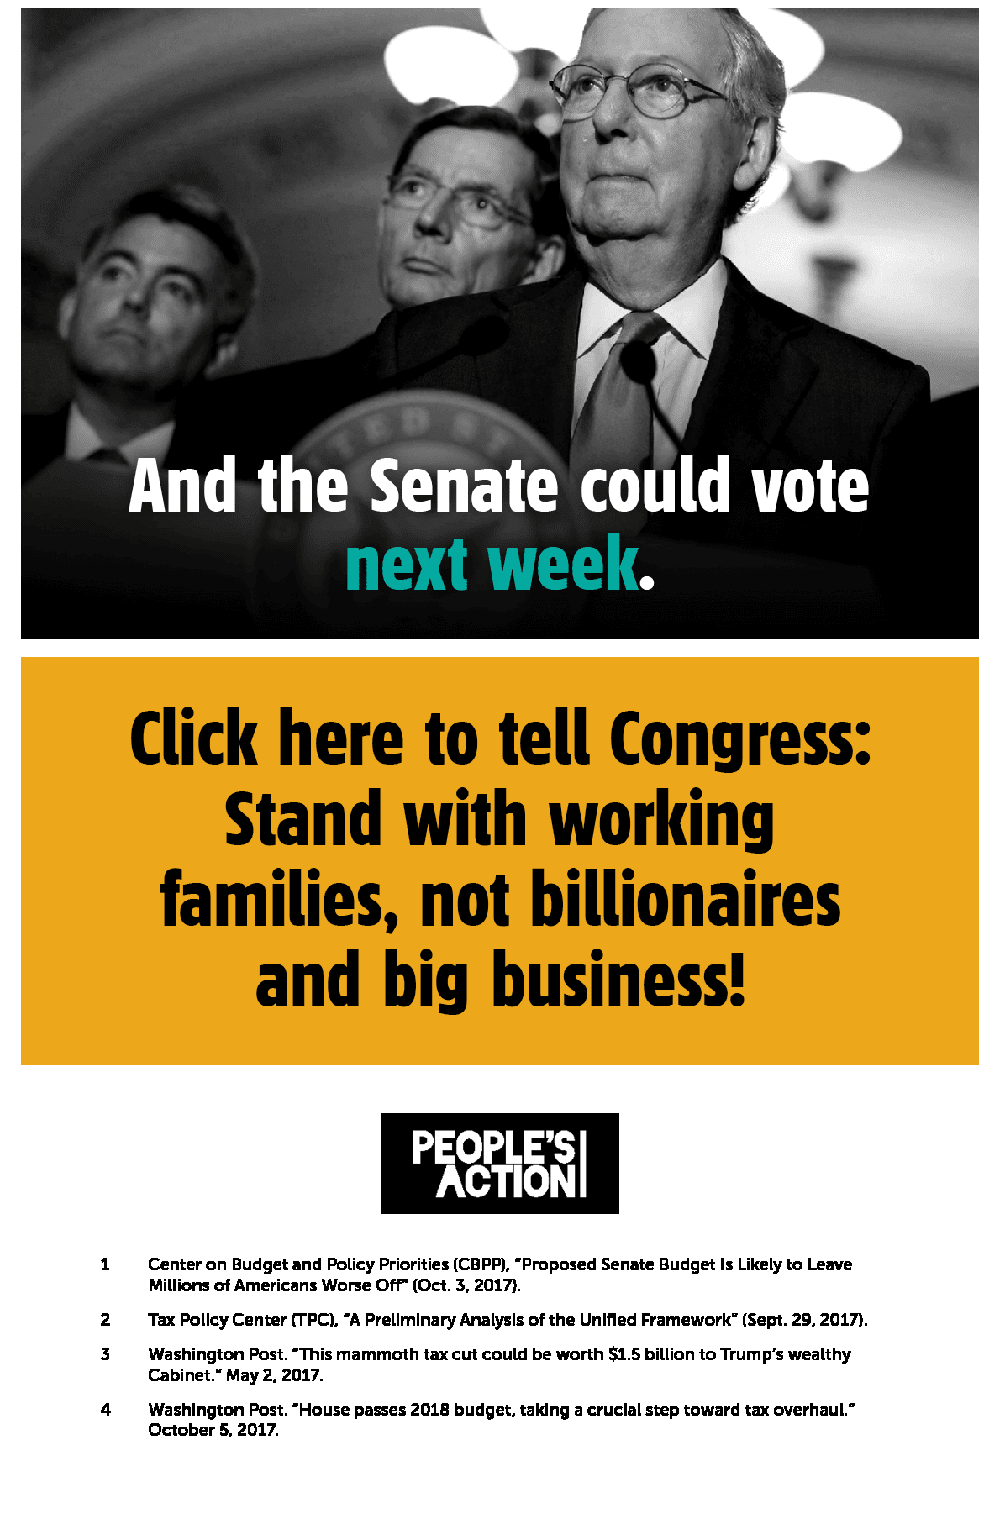 And the Senate could vote next week. Tell Congress to stand with working families, not billionaires and big business!